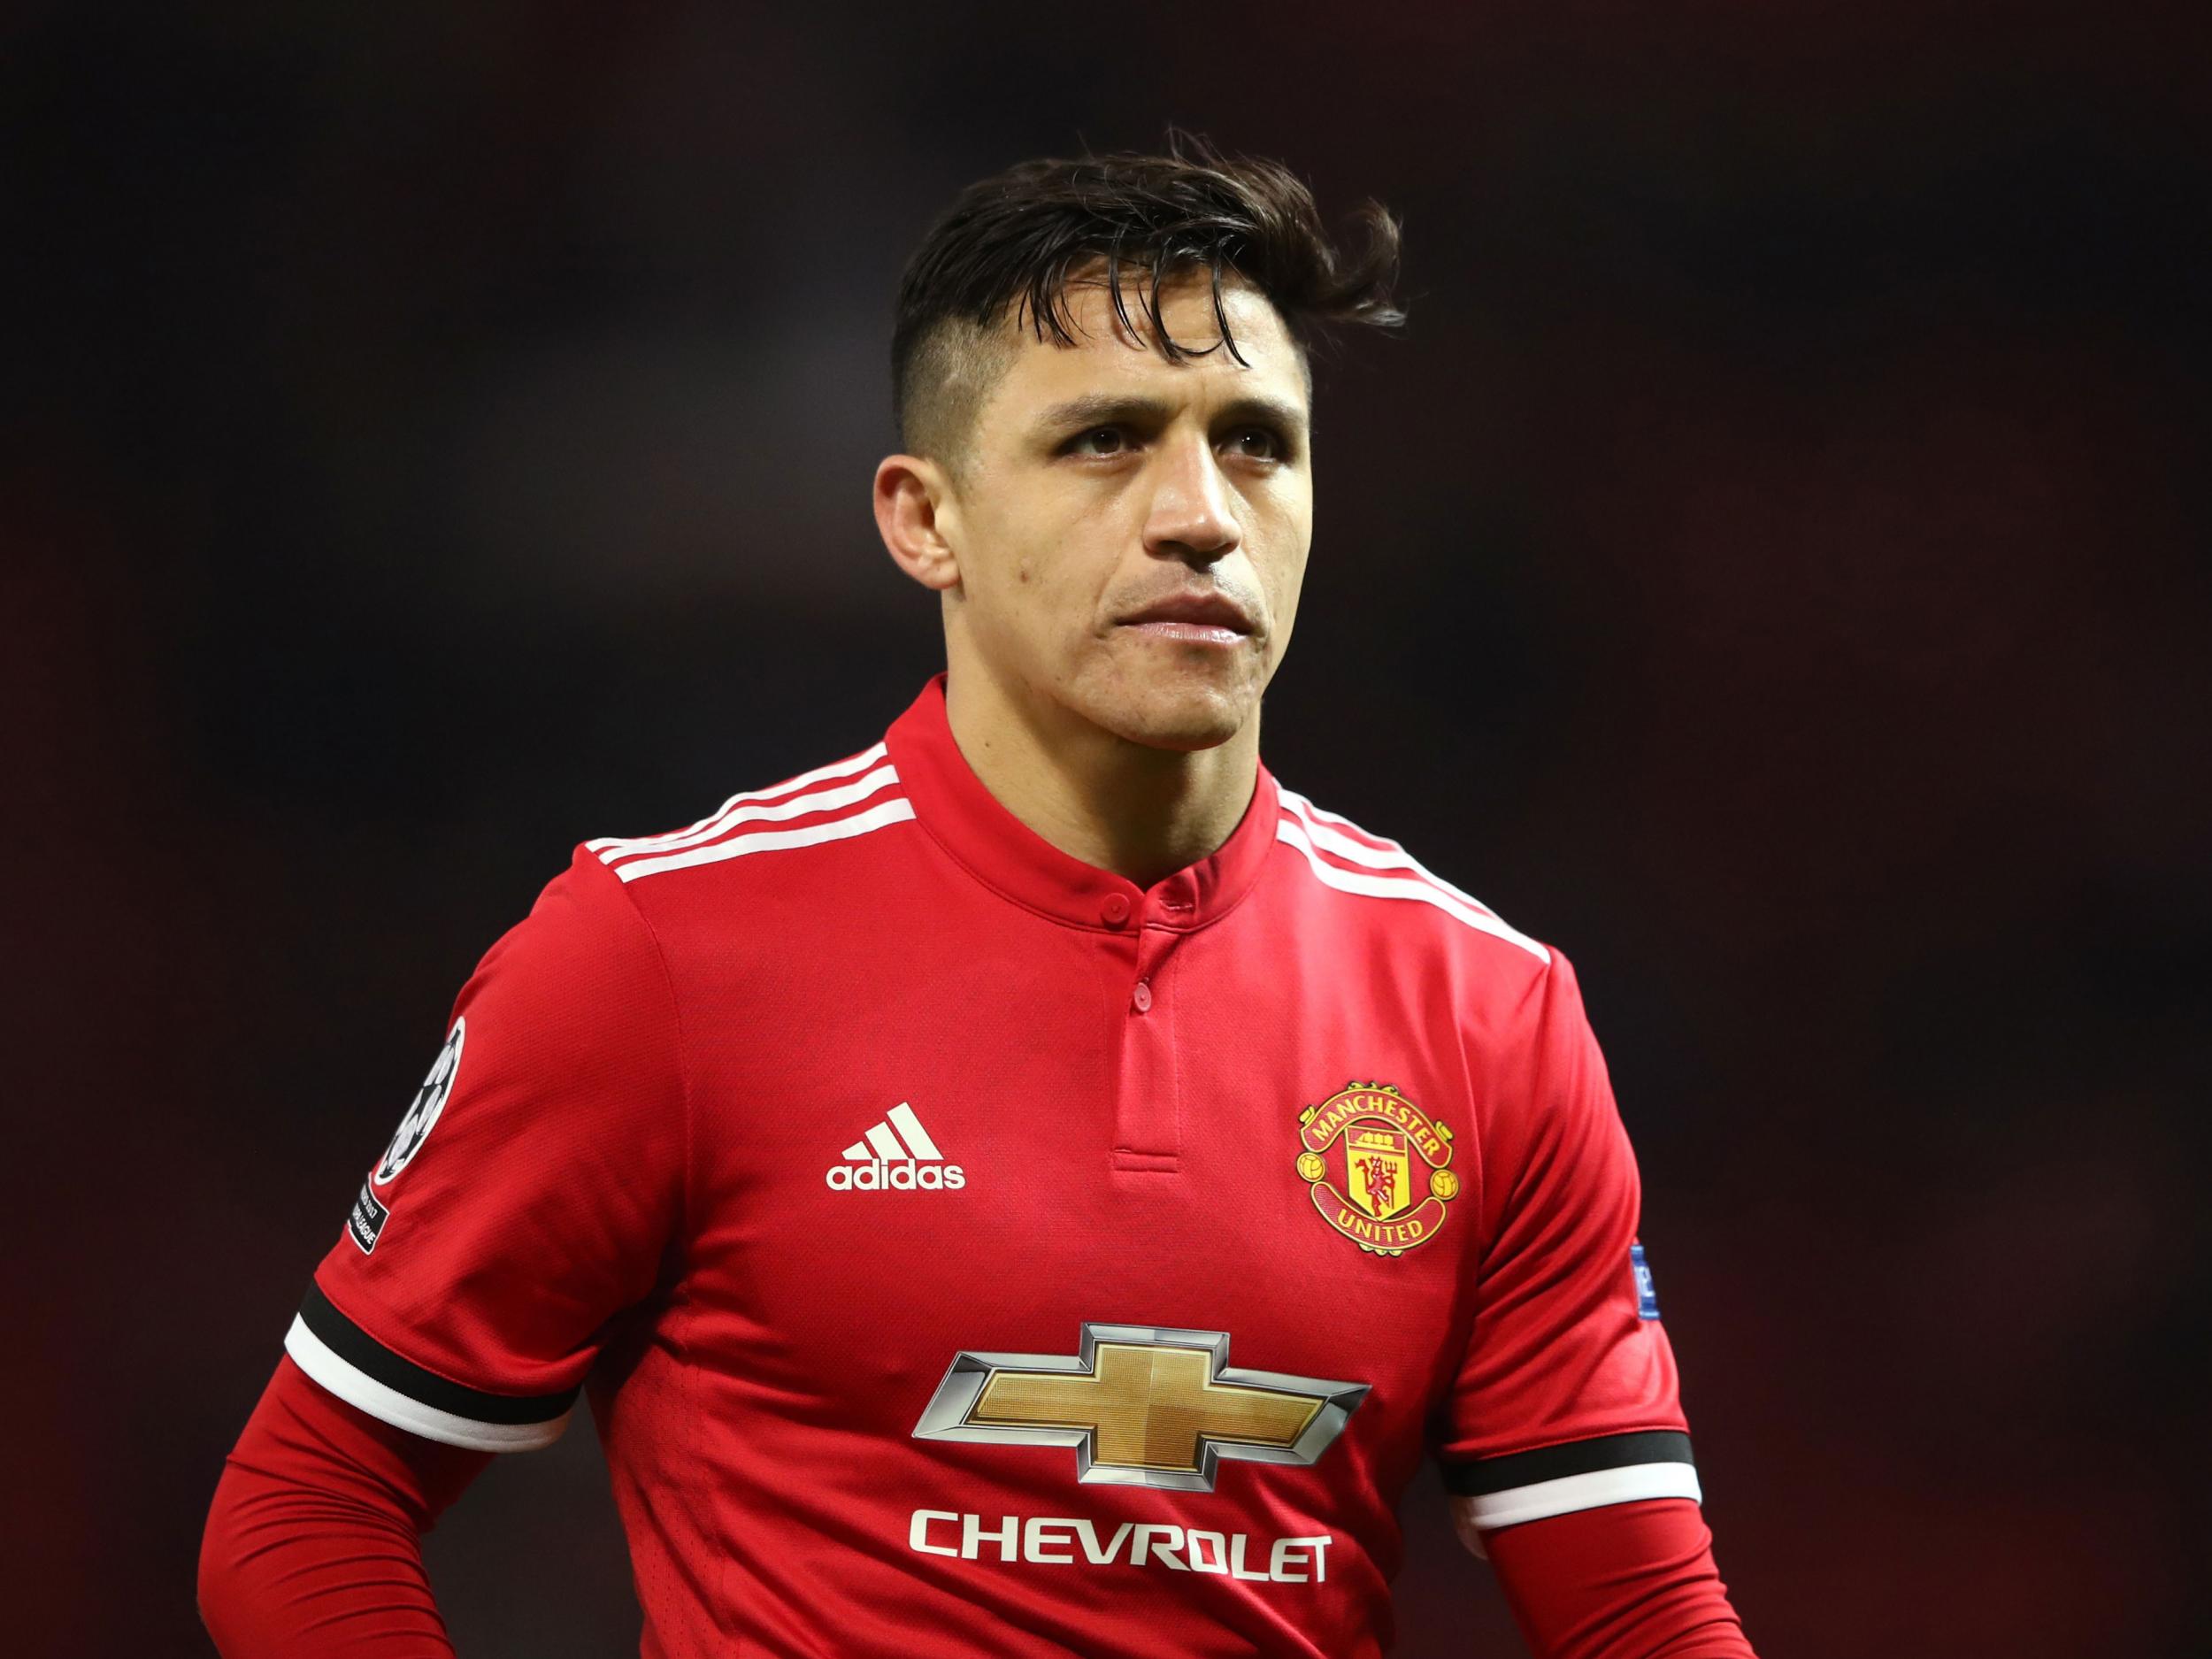 Alexis Sanchez joined Manchester United earlier this year